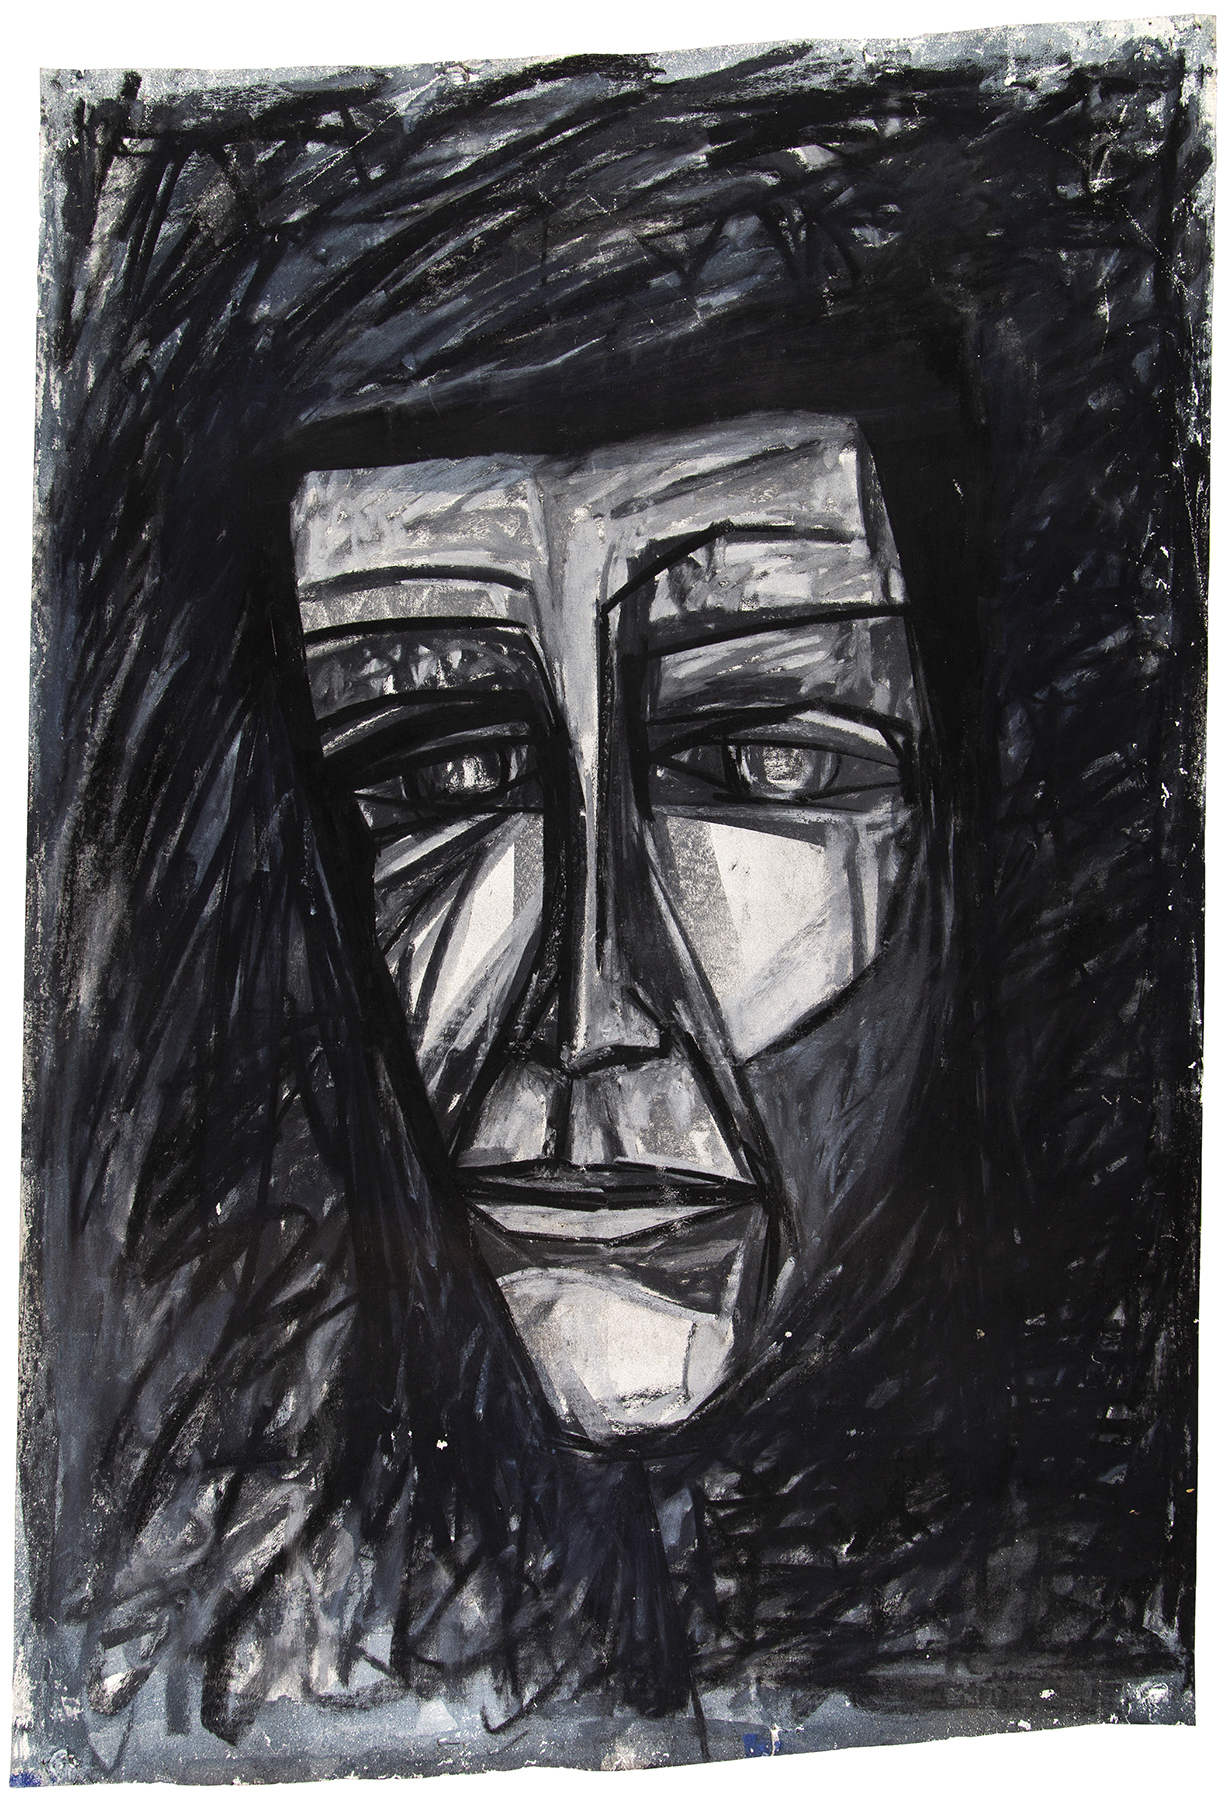 Abstract drawing of a figure's face in black charcoal and shades of grey